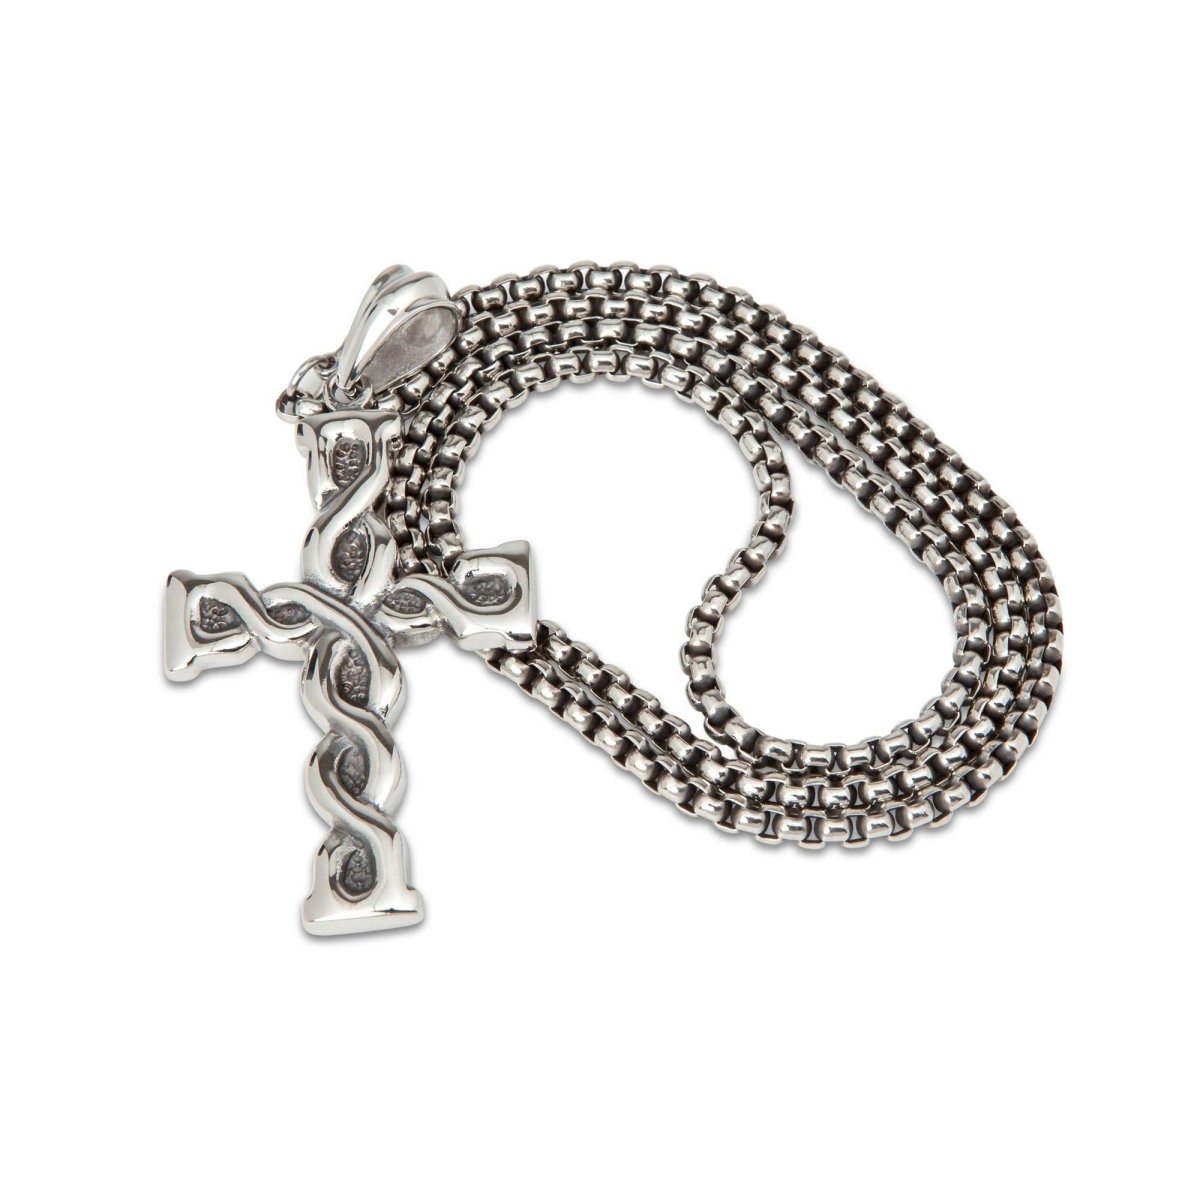 Silver Cross Necklace - MenSuits